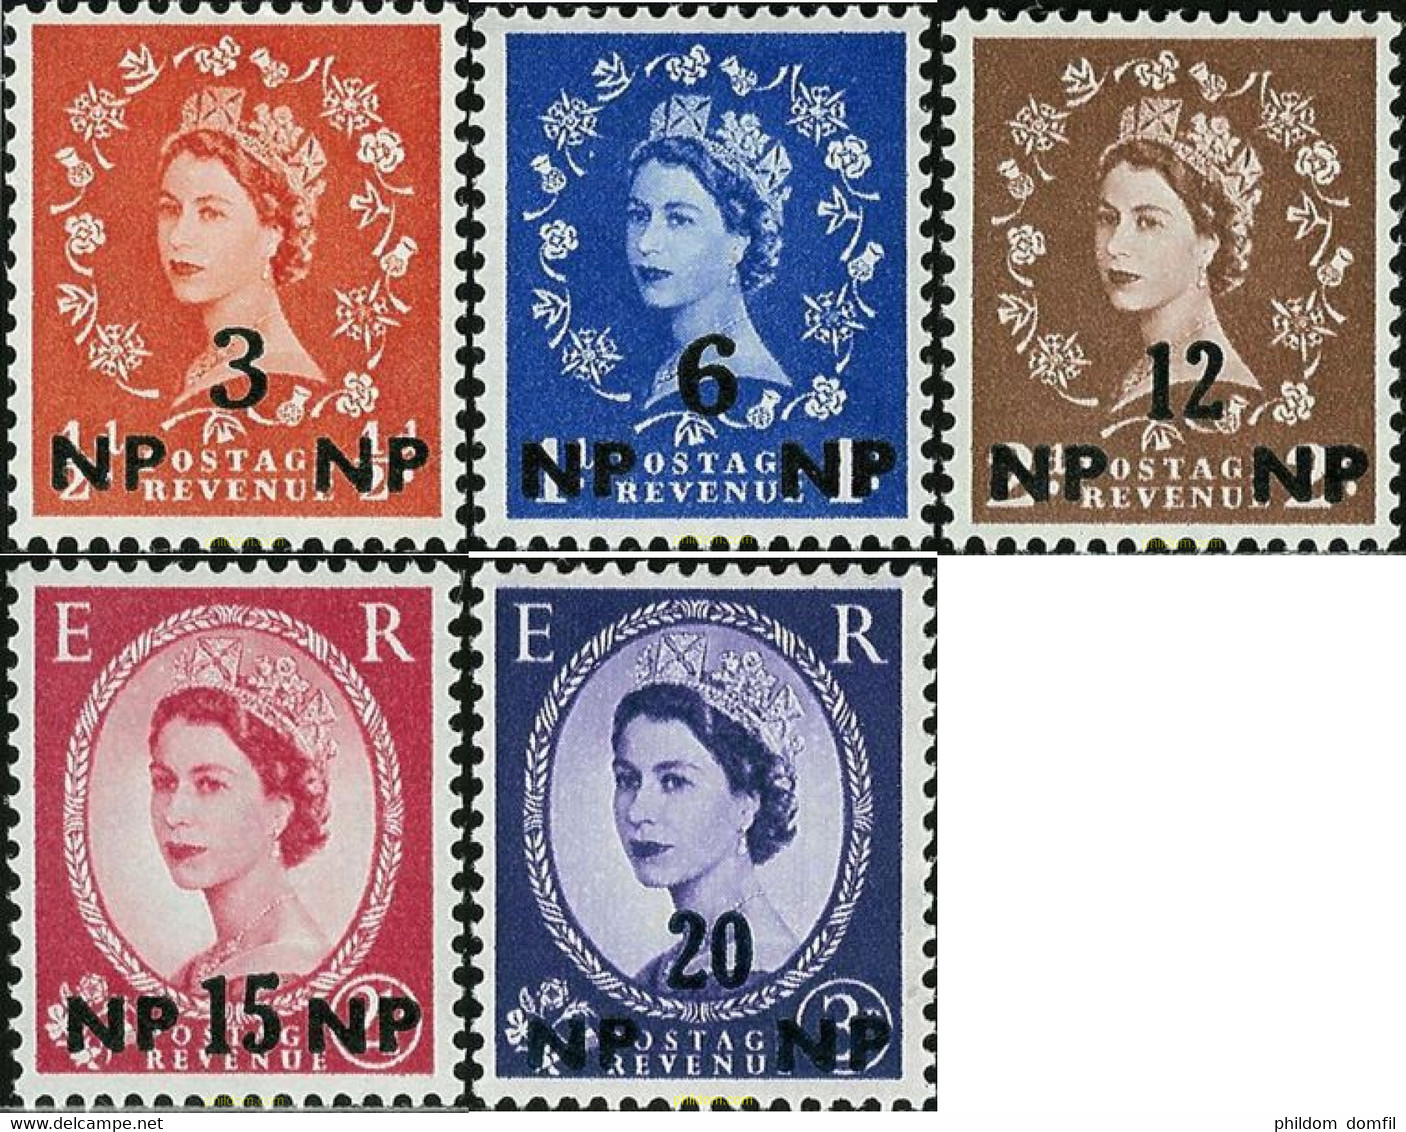 696695 MNH MASCATE 1960 REINA ISABEL II - Châteaux